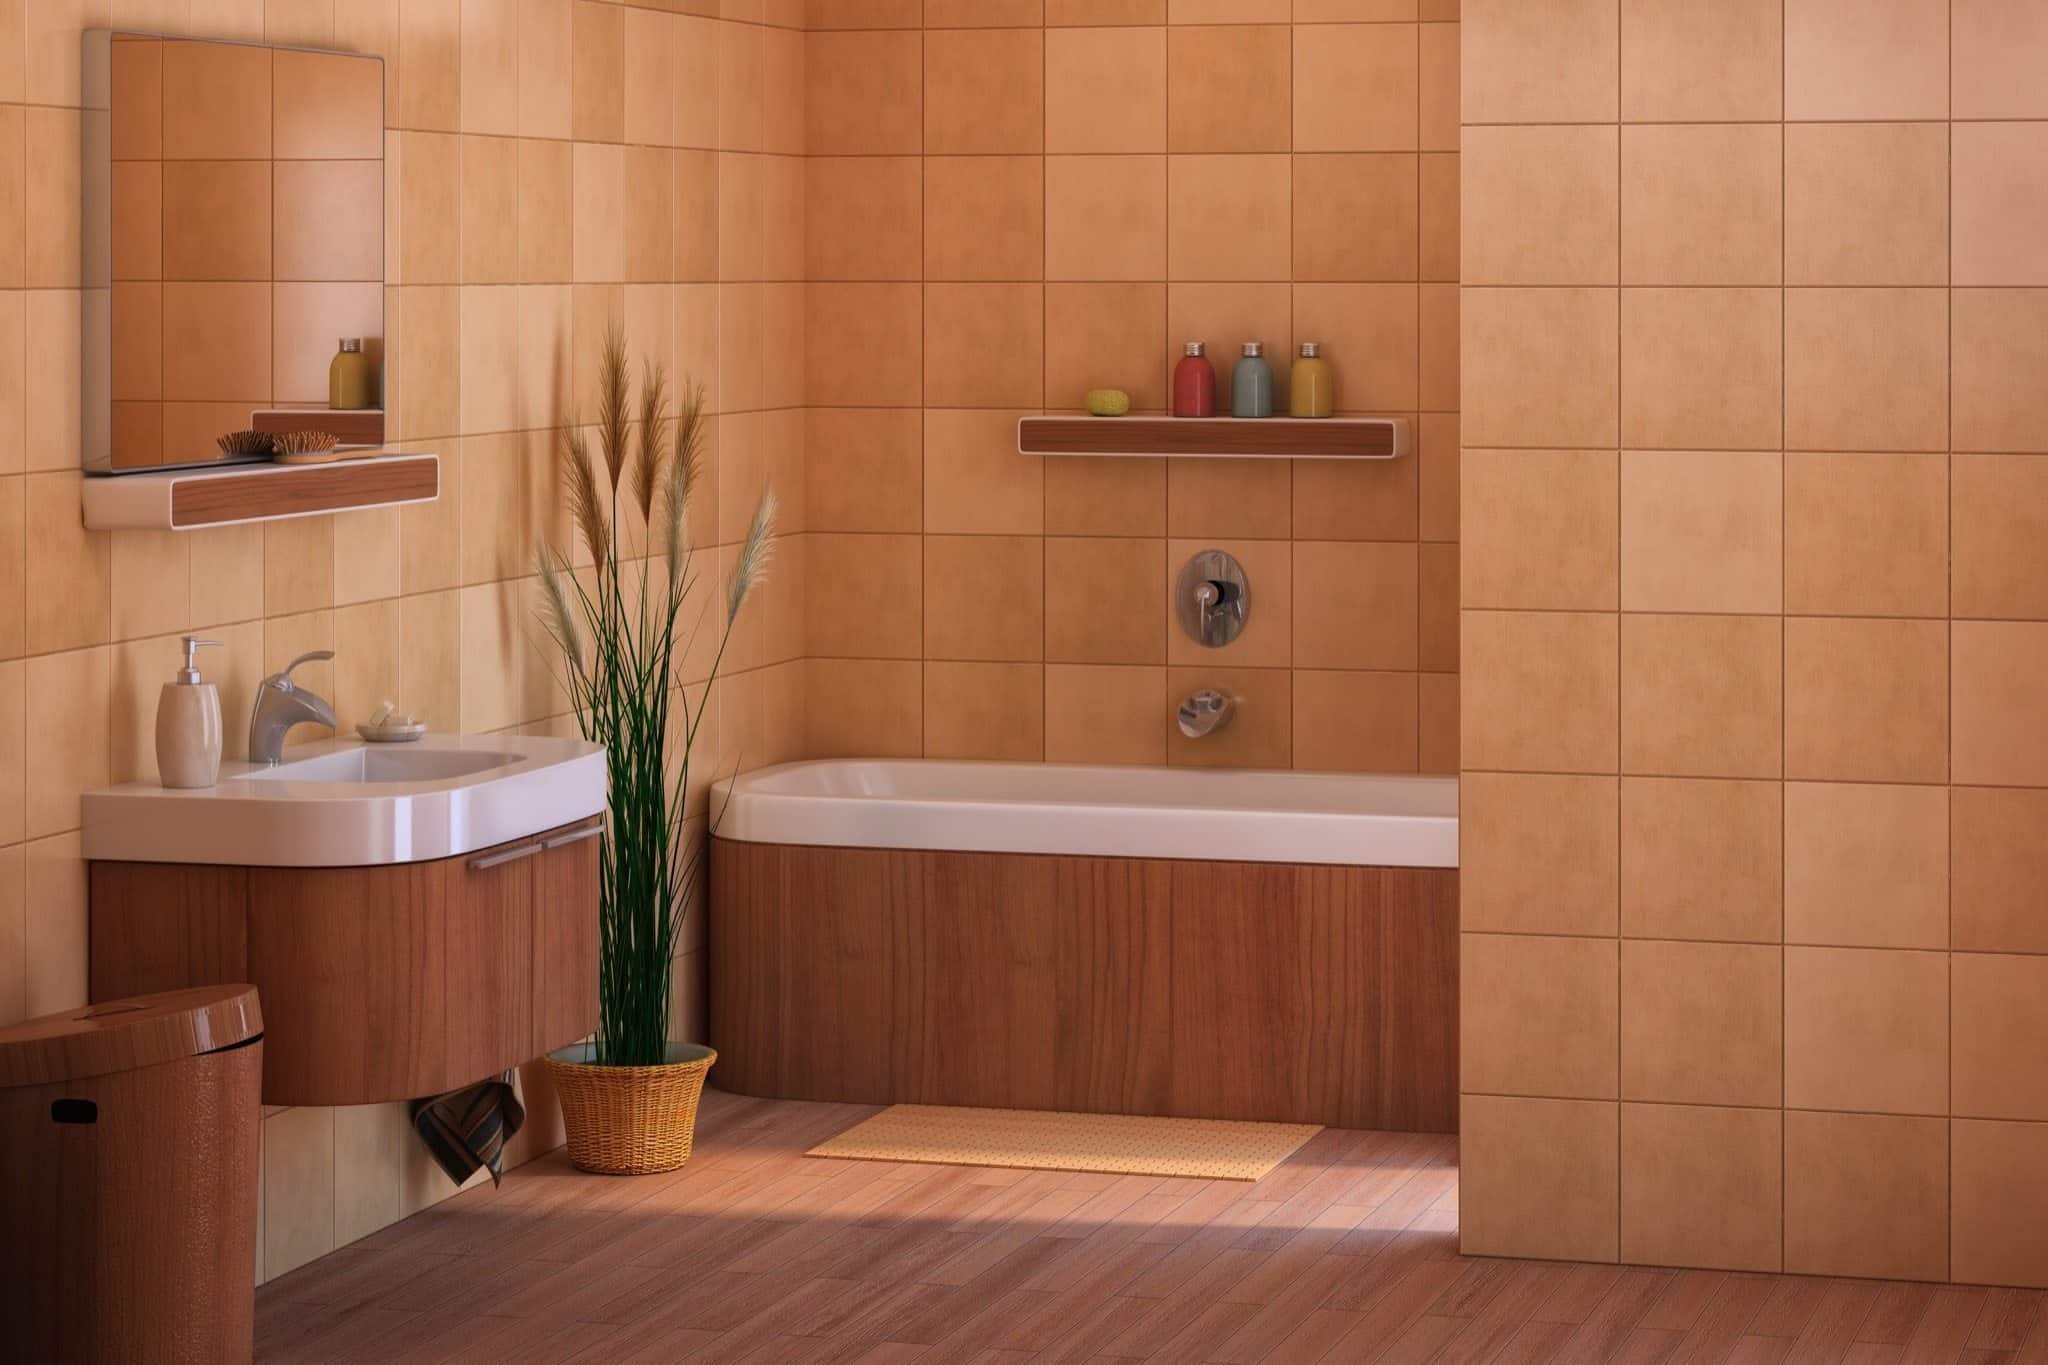 7 Steps for Clean Tile and Grout